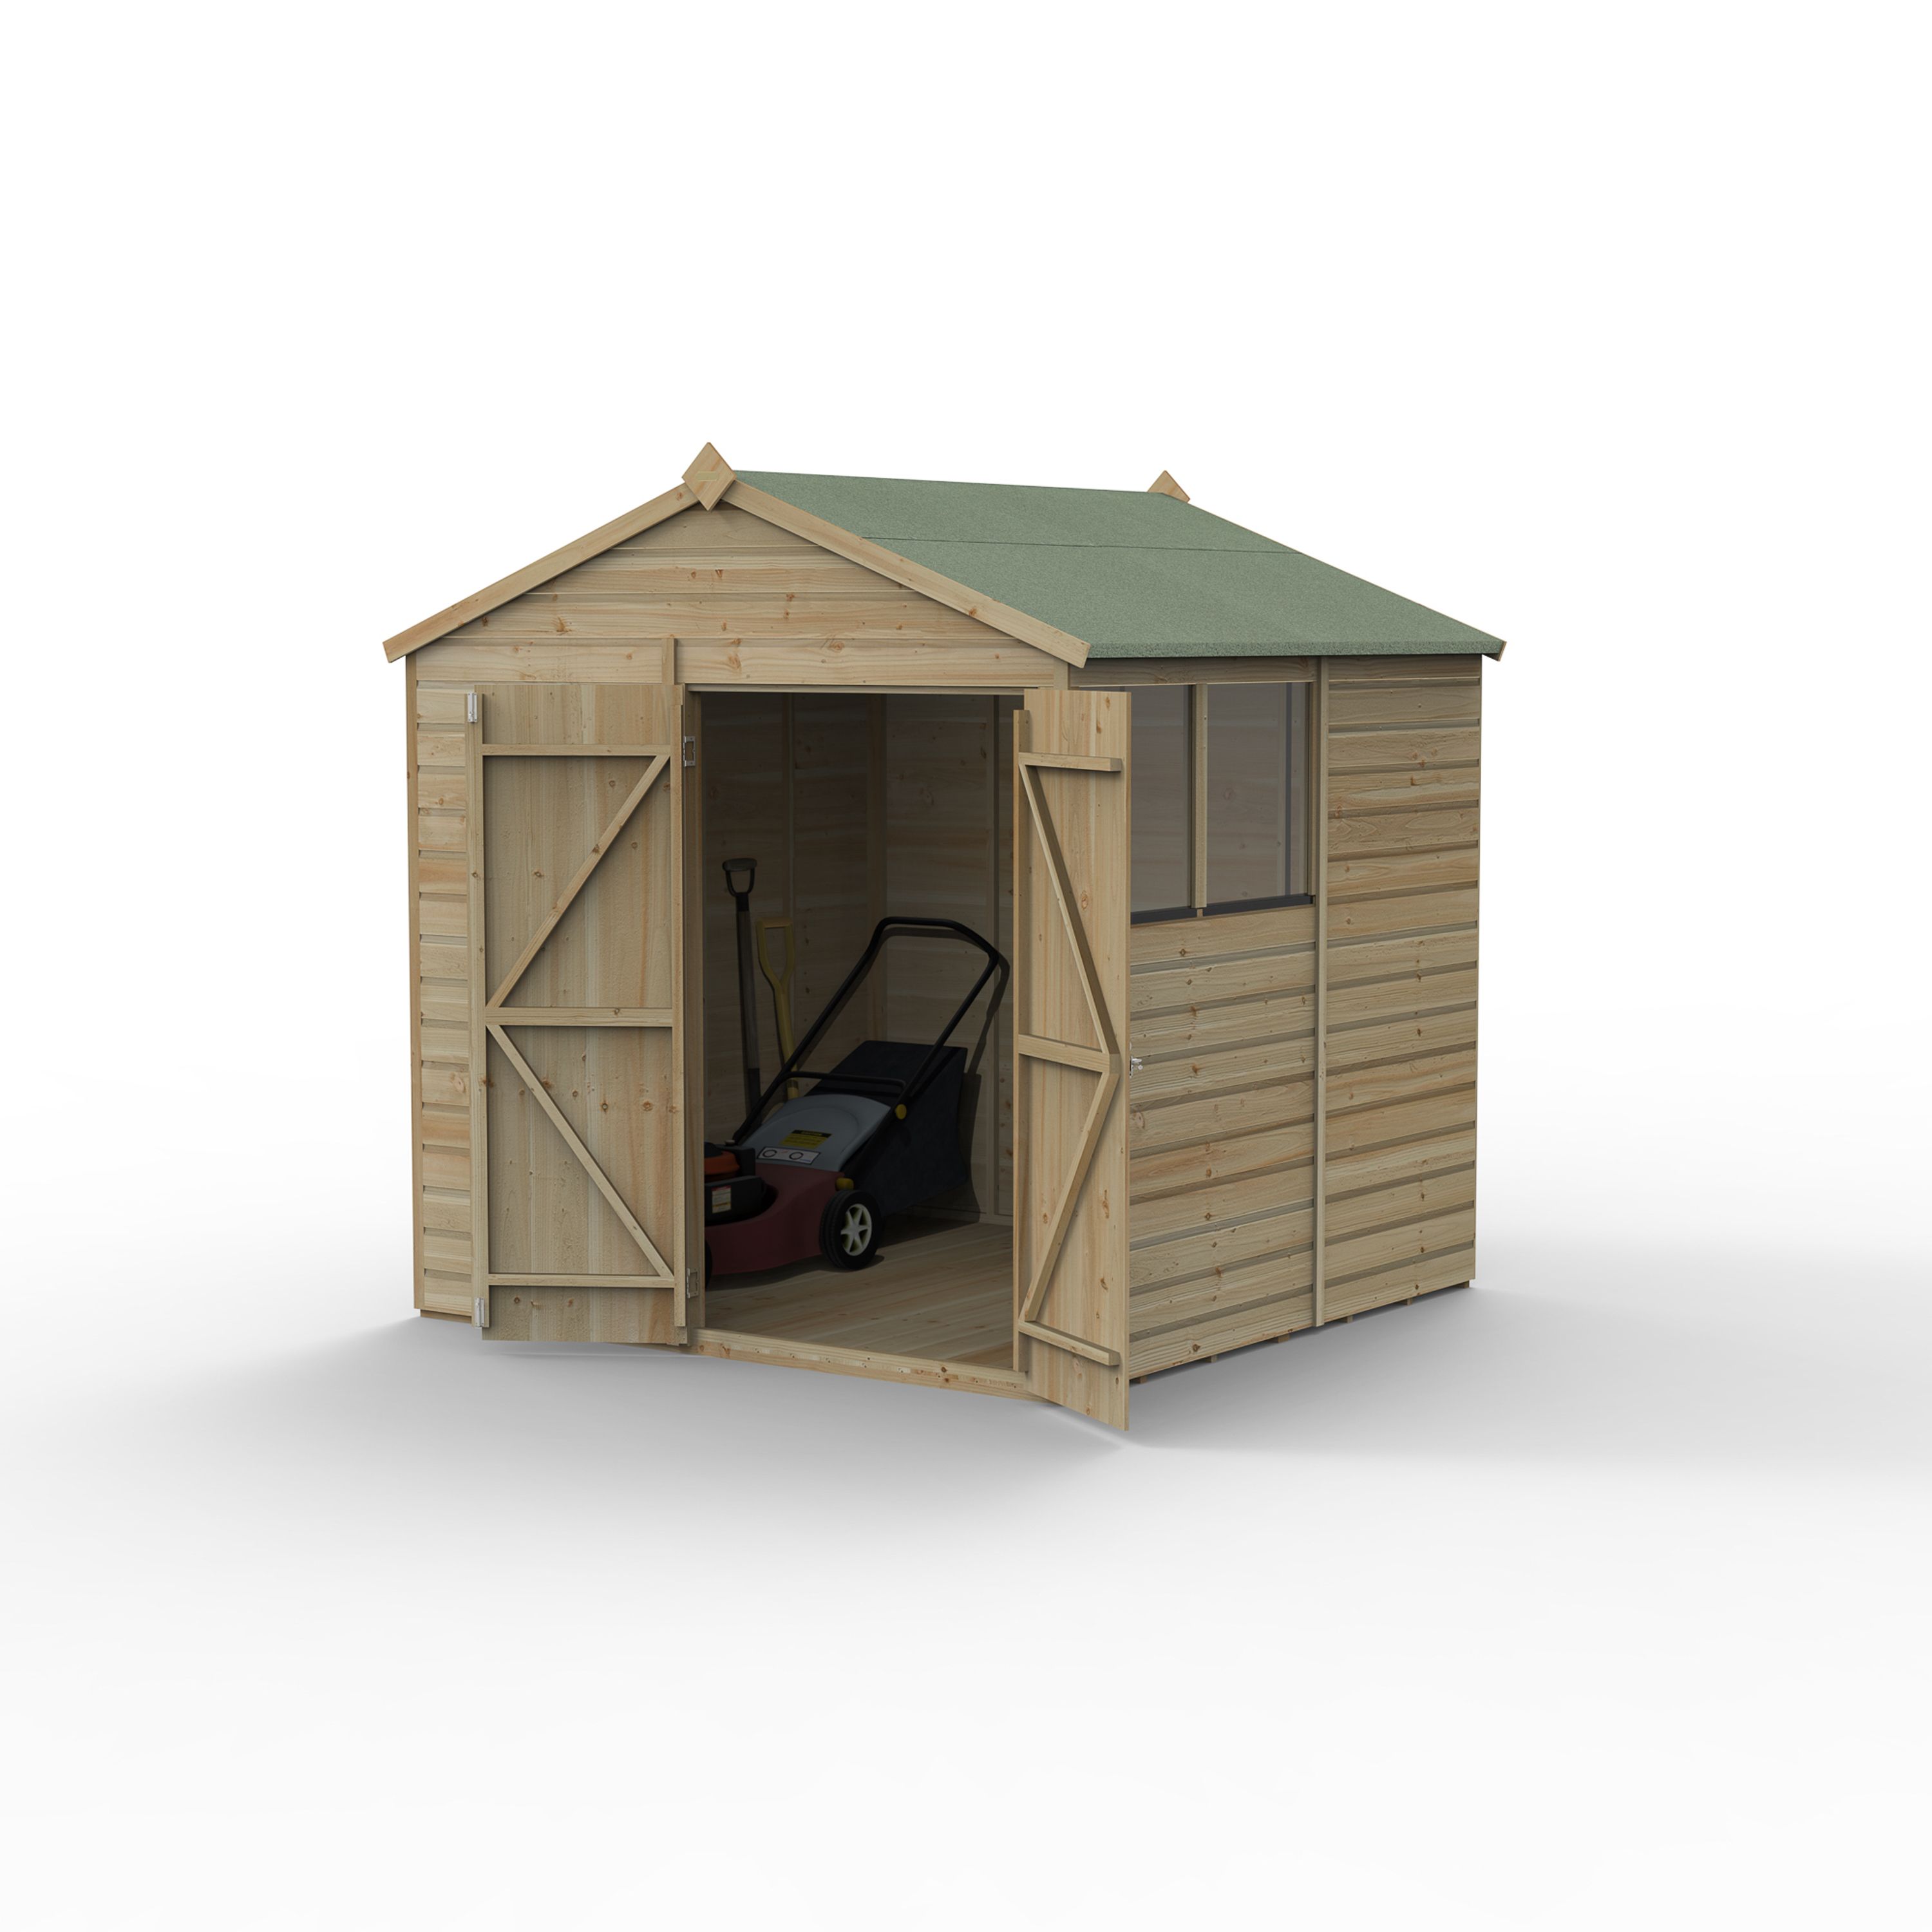 Forest Garden Beckwood 7x7 ft Apex Natural timber Wooden 2 door Shed with floor & 2 windows (Base included) - Assembly not required